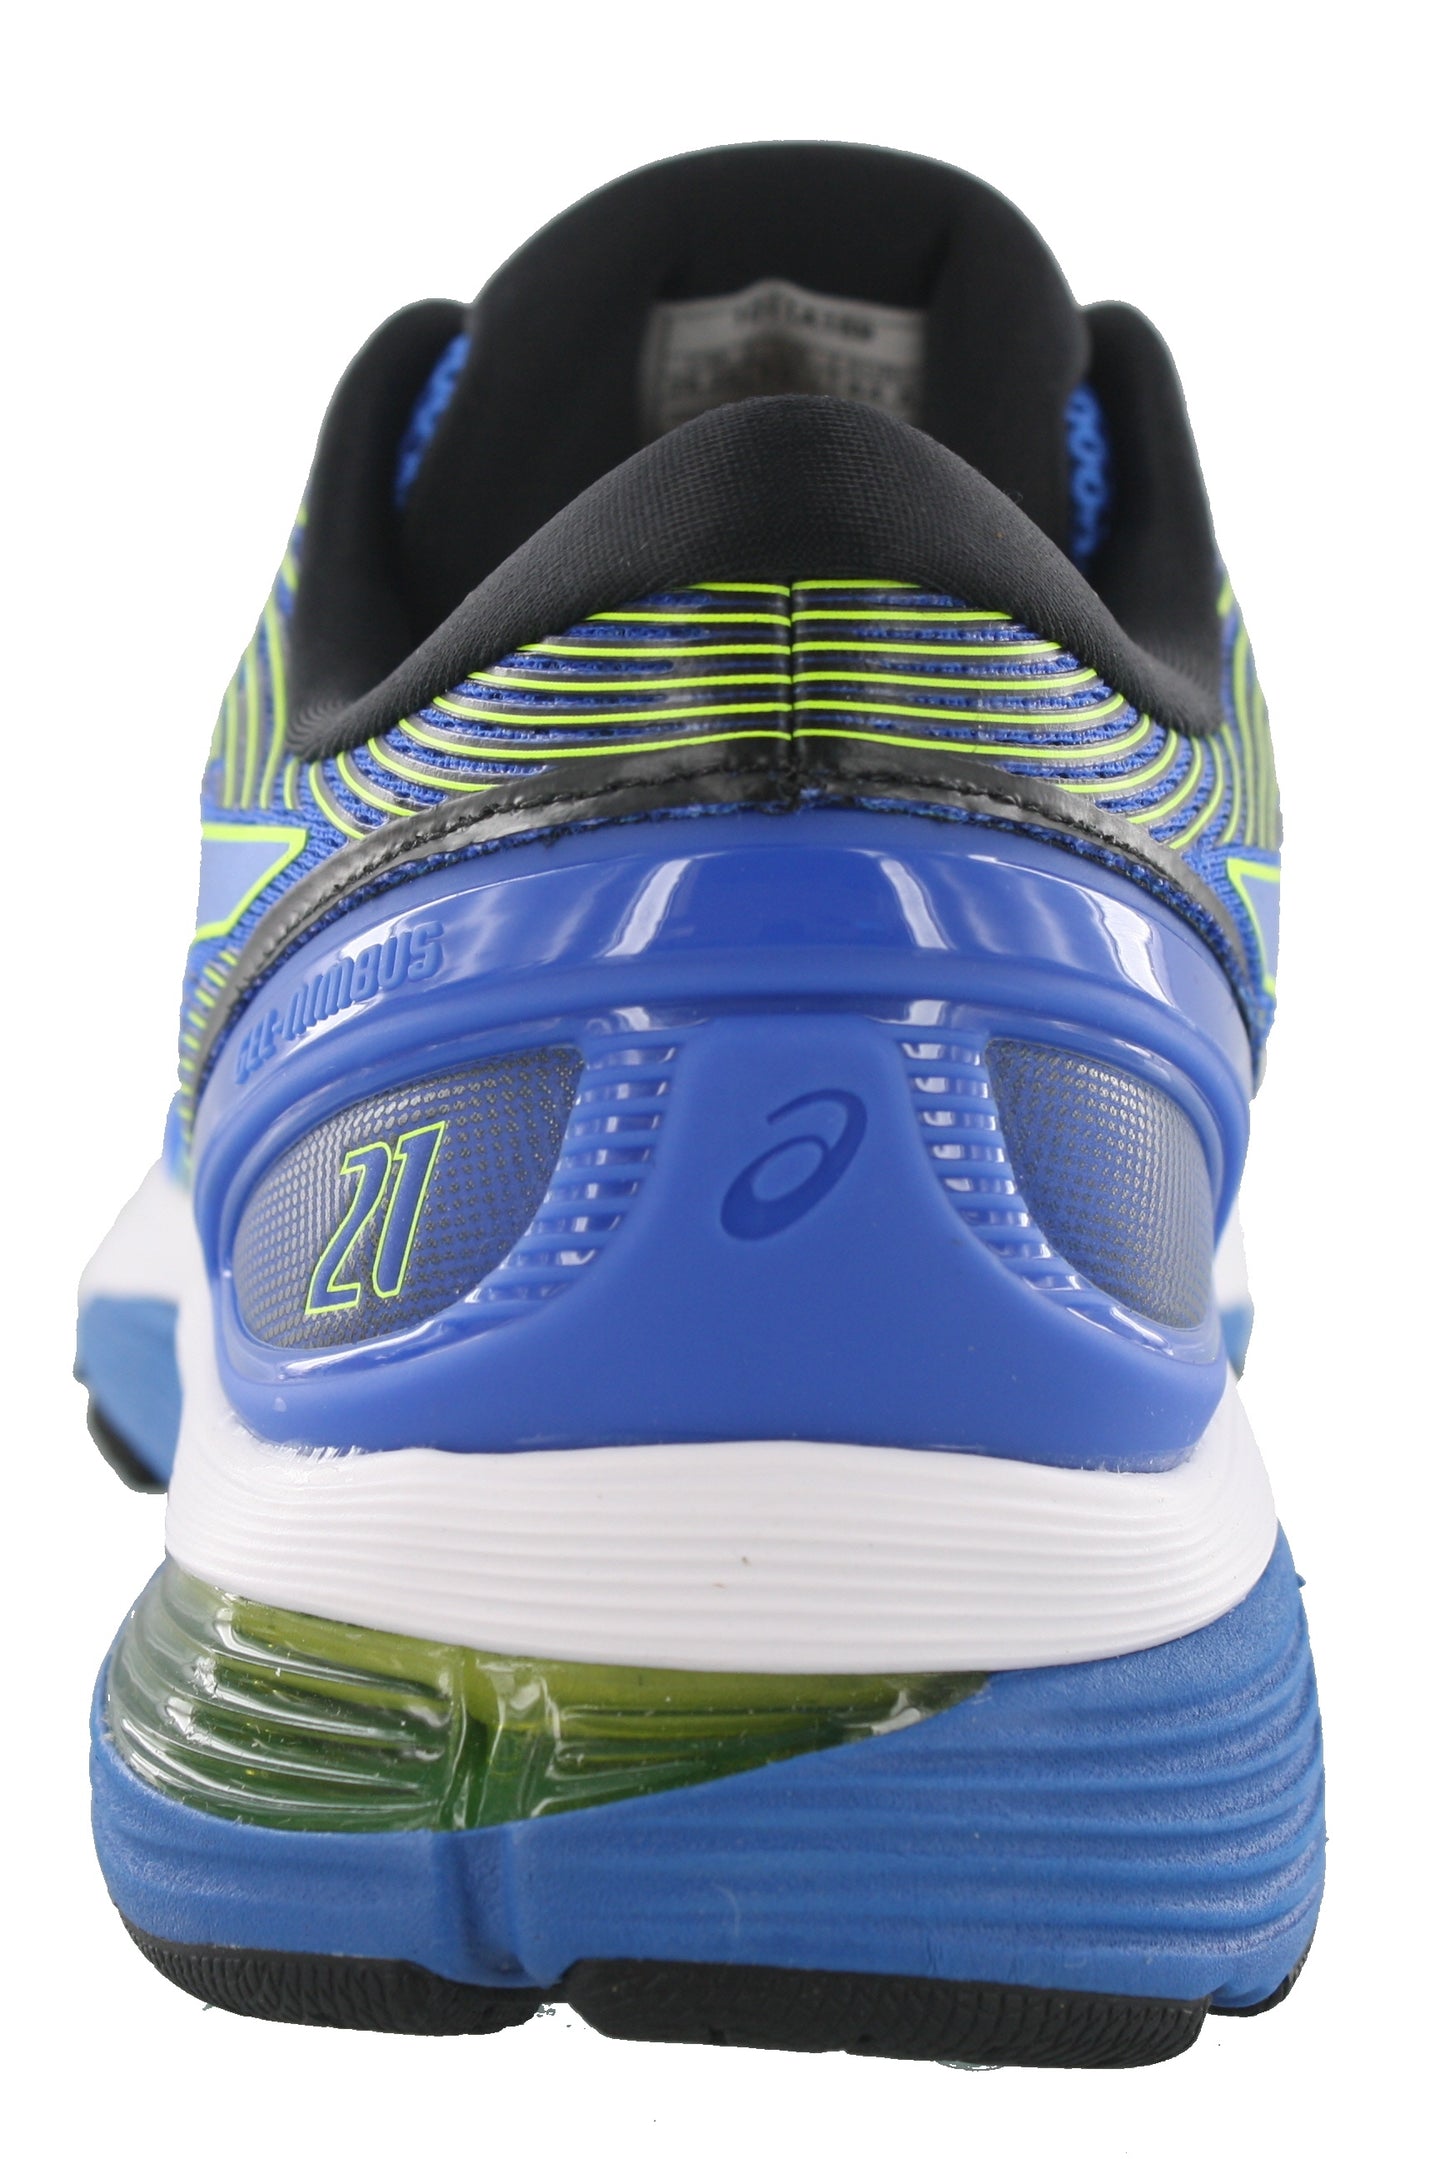 
                  
                    Back of Illusion Blue with Yellow & Black accents ASICS Men Walking Trail Cushioned Running Shoes Gel Nimbus 21
                  
                